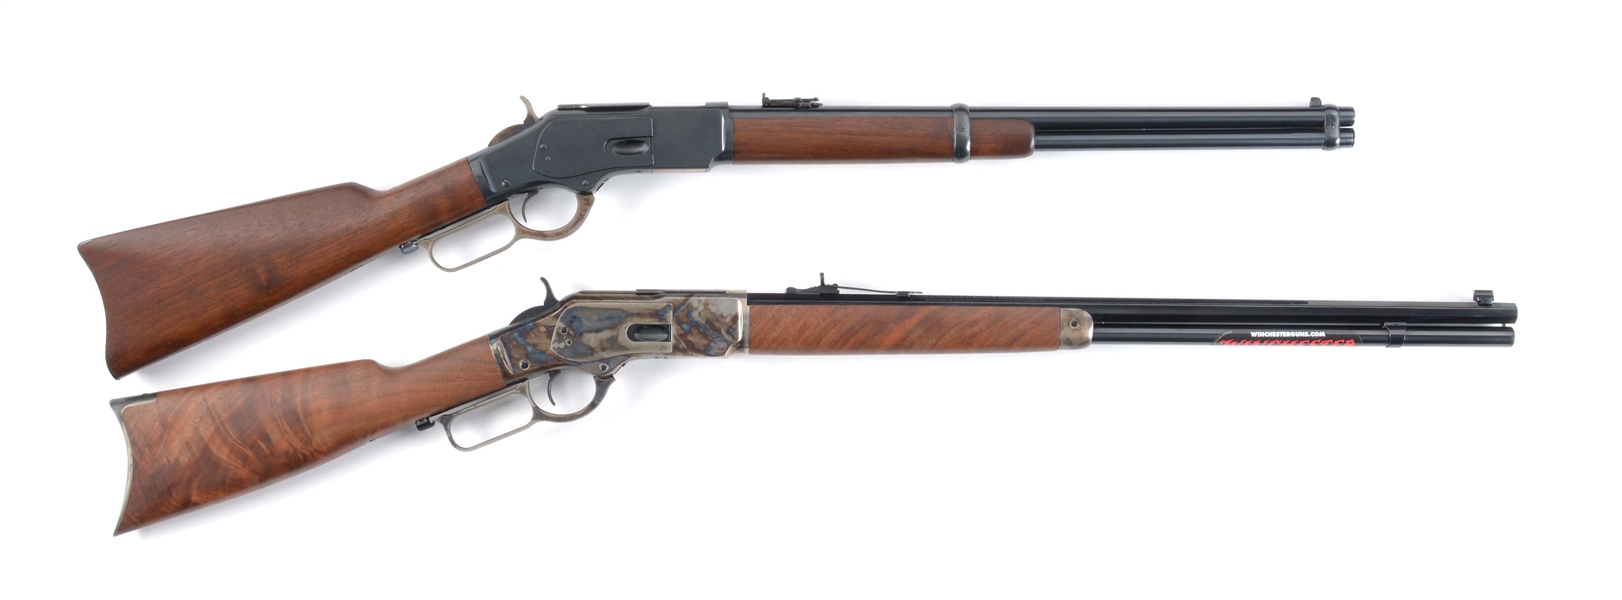 (C+M) LOT OF TWO LEVER ACTION RIFLES: WINCHESTER 1873 .44-40 AND WINCHESTER 1873 .357 MAGNUM.